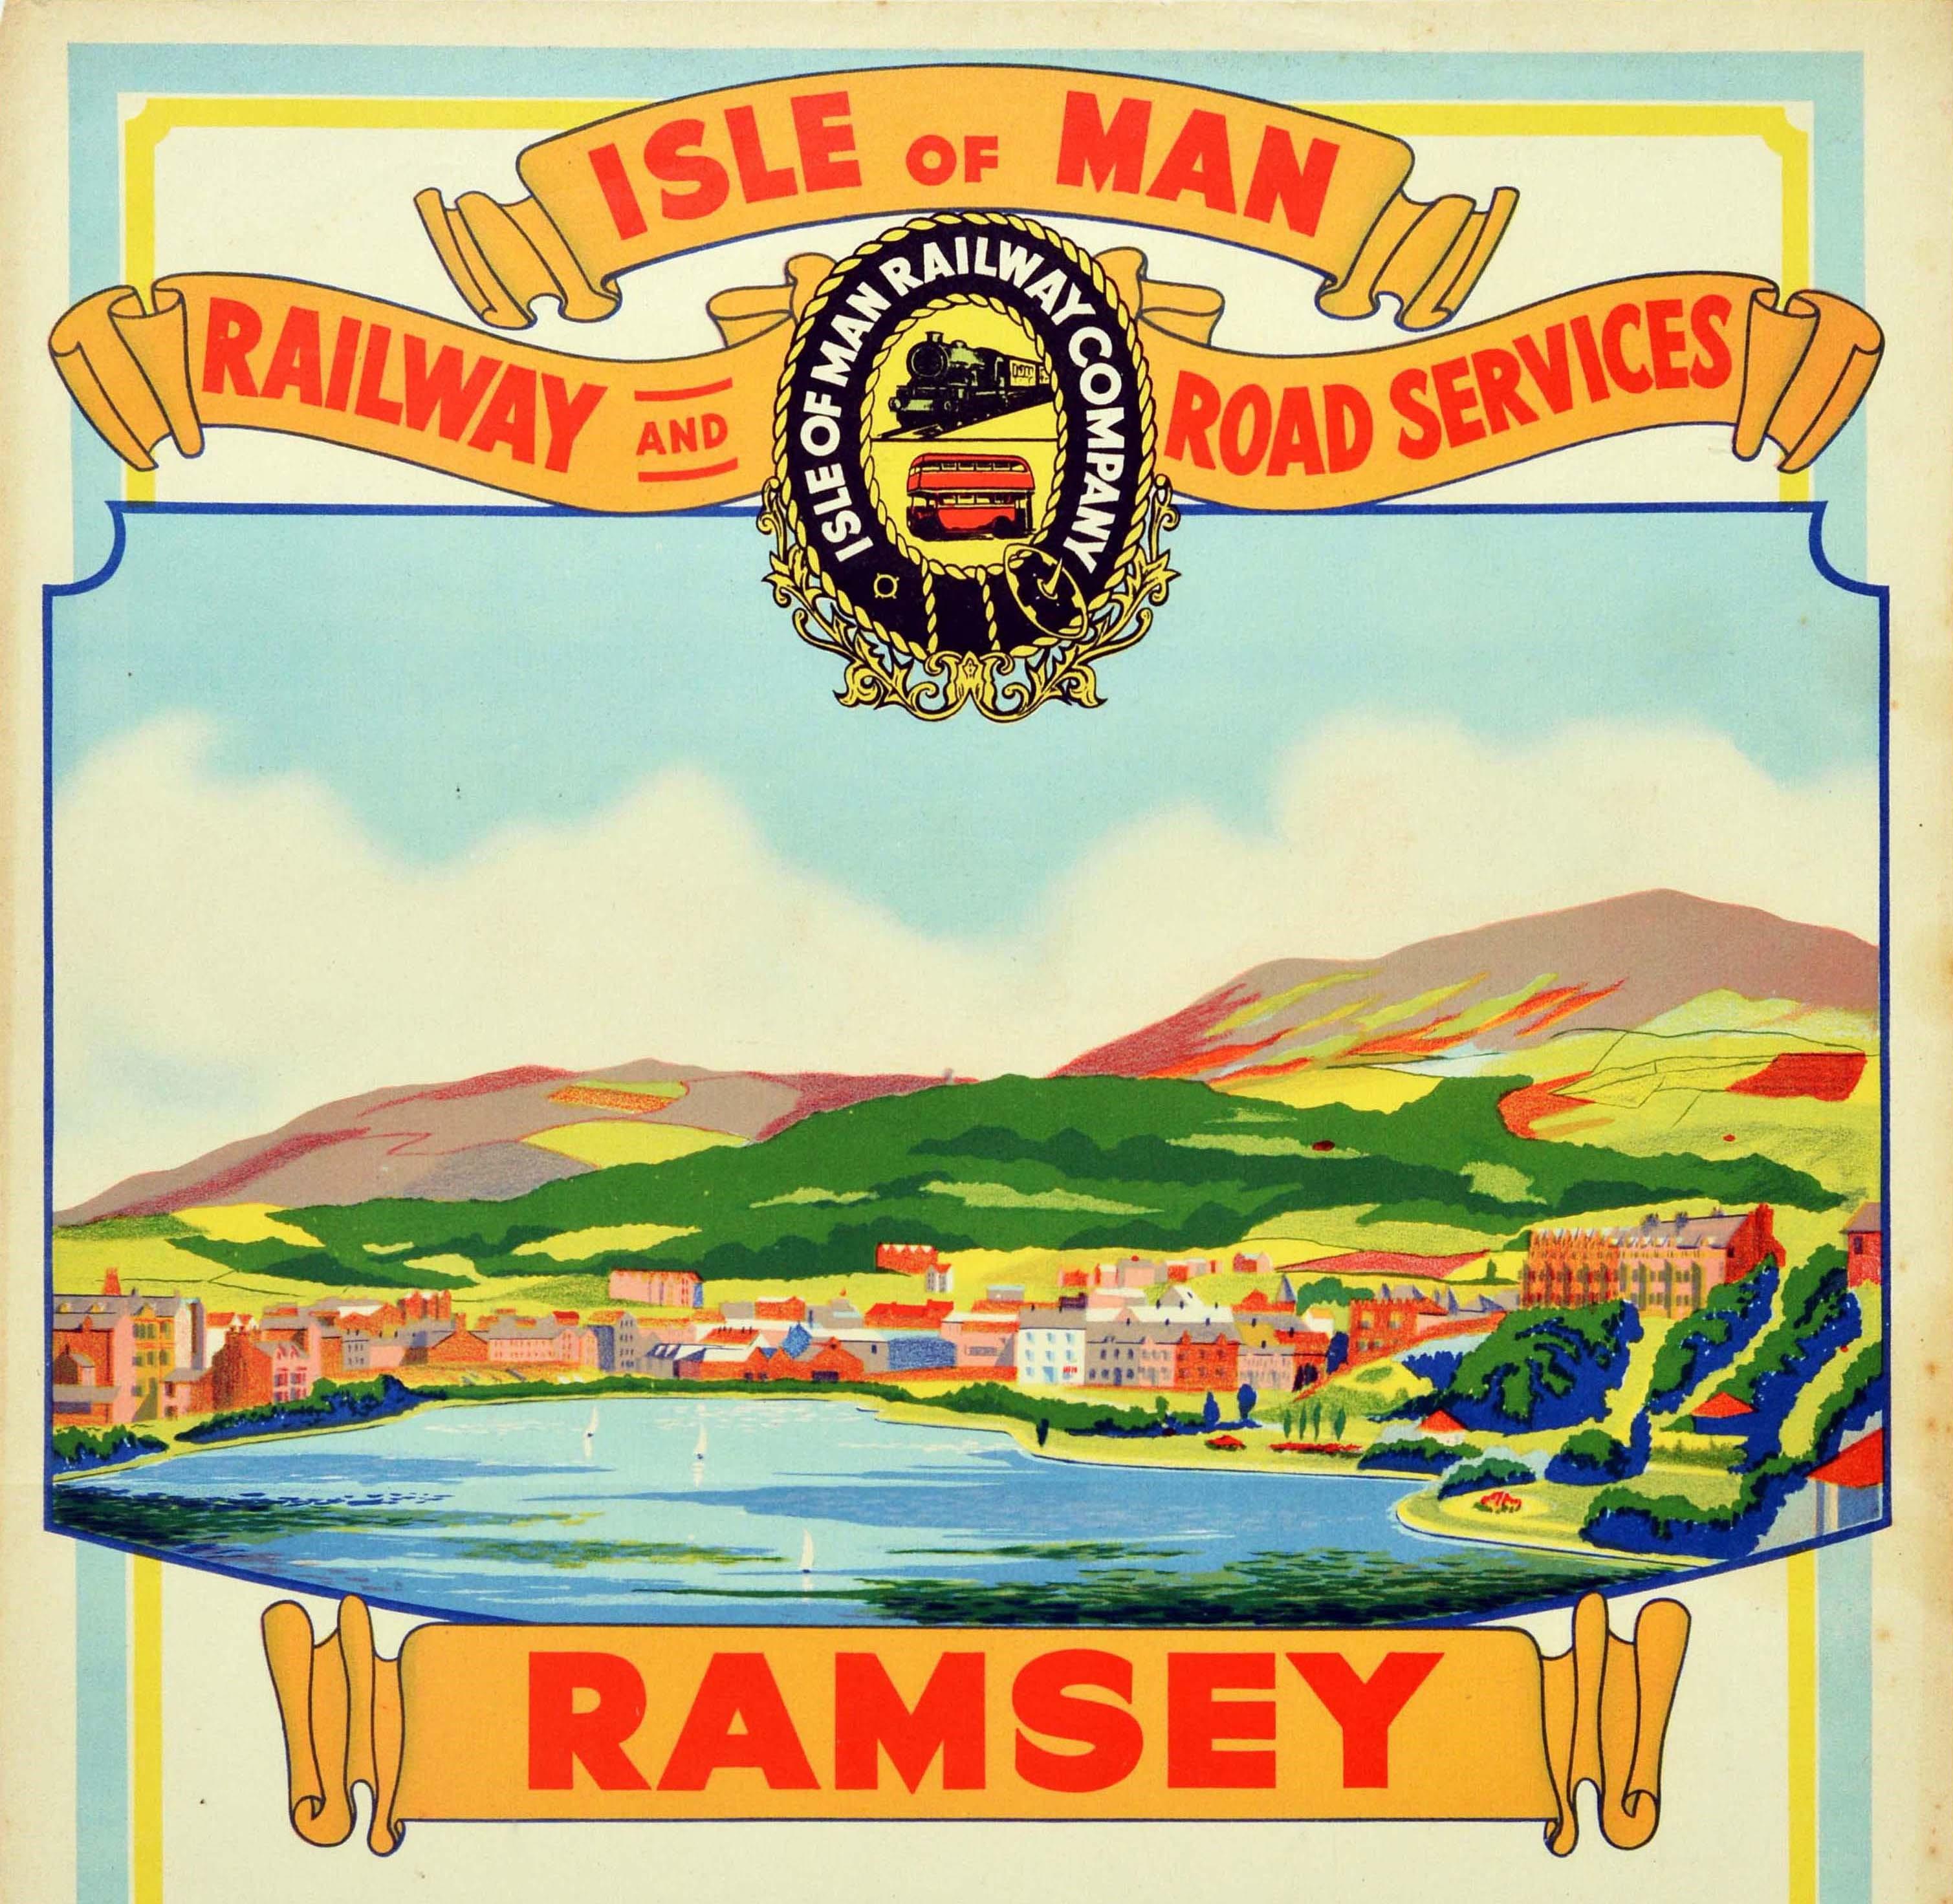 Original Vintage Travel Poster Isle Of Man Railway Road Services Ramsey Sailing - Print by Unknown